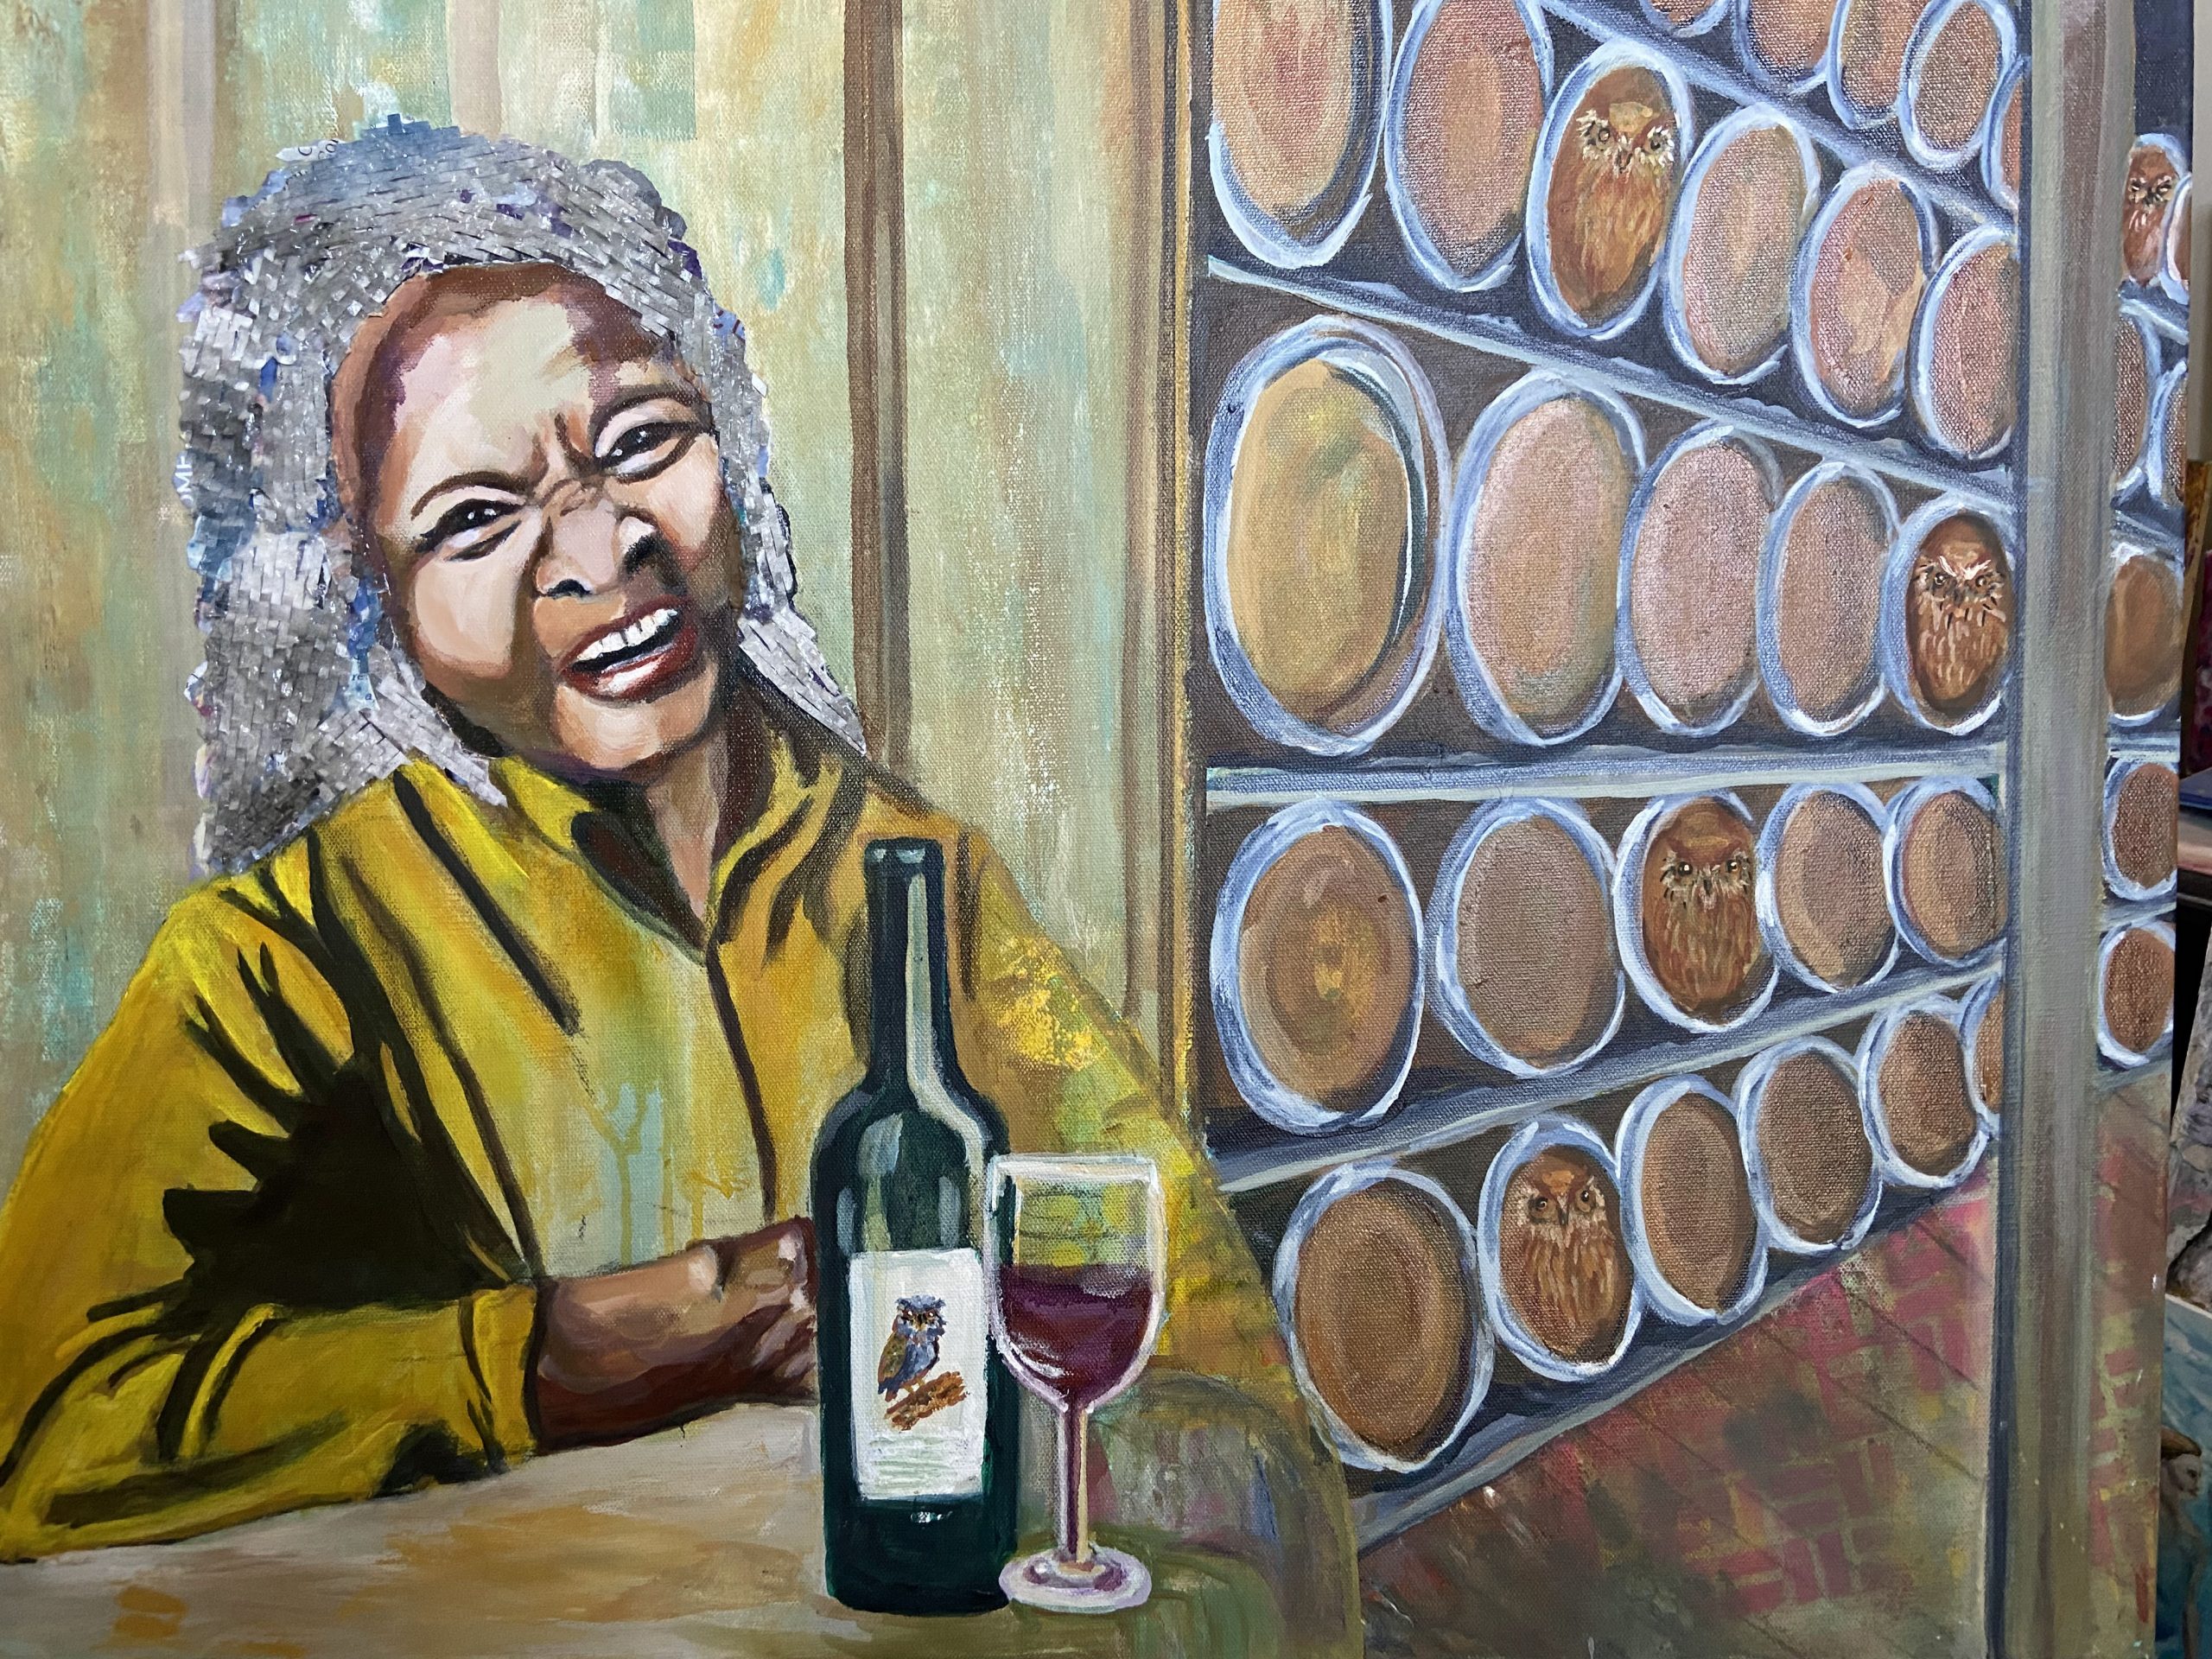 A painting titled "Barrels of Fun showing a woman sitting in a winery with a bottle of wine and a glass in front of her. 